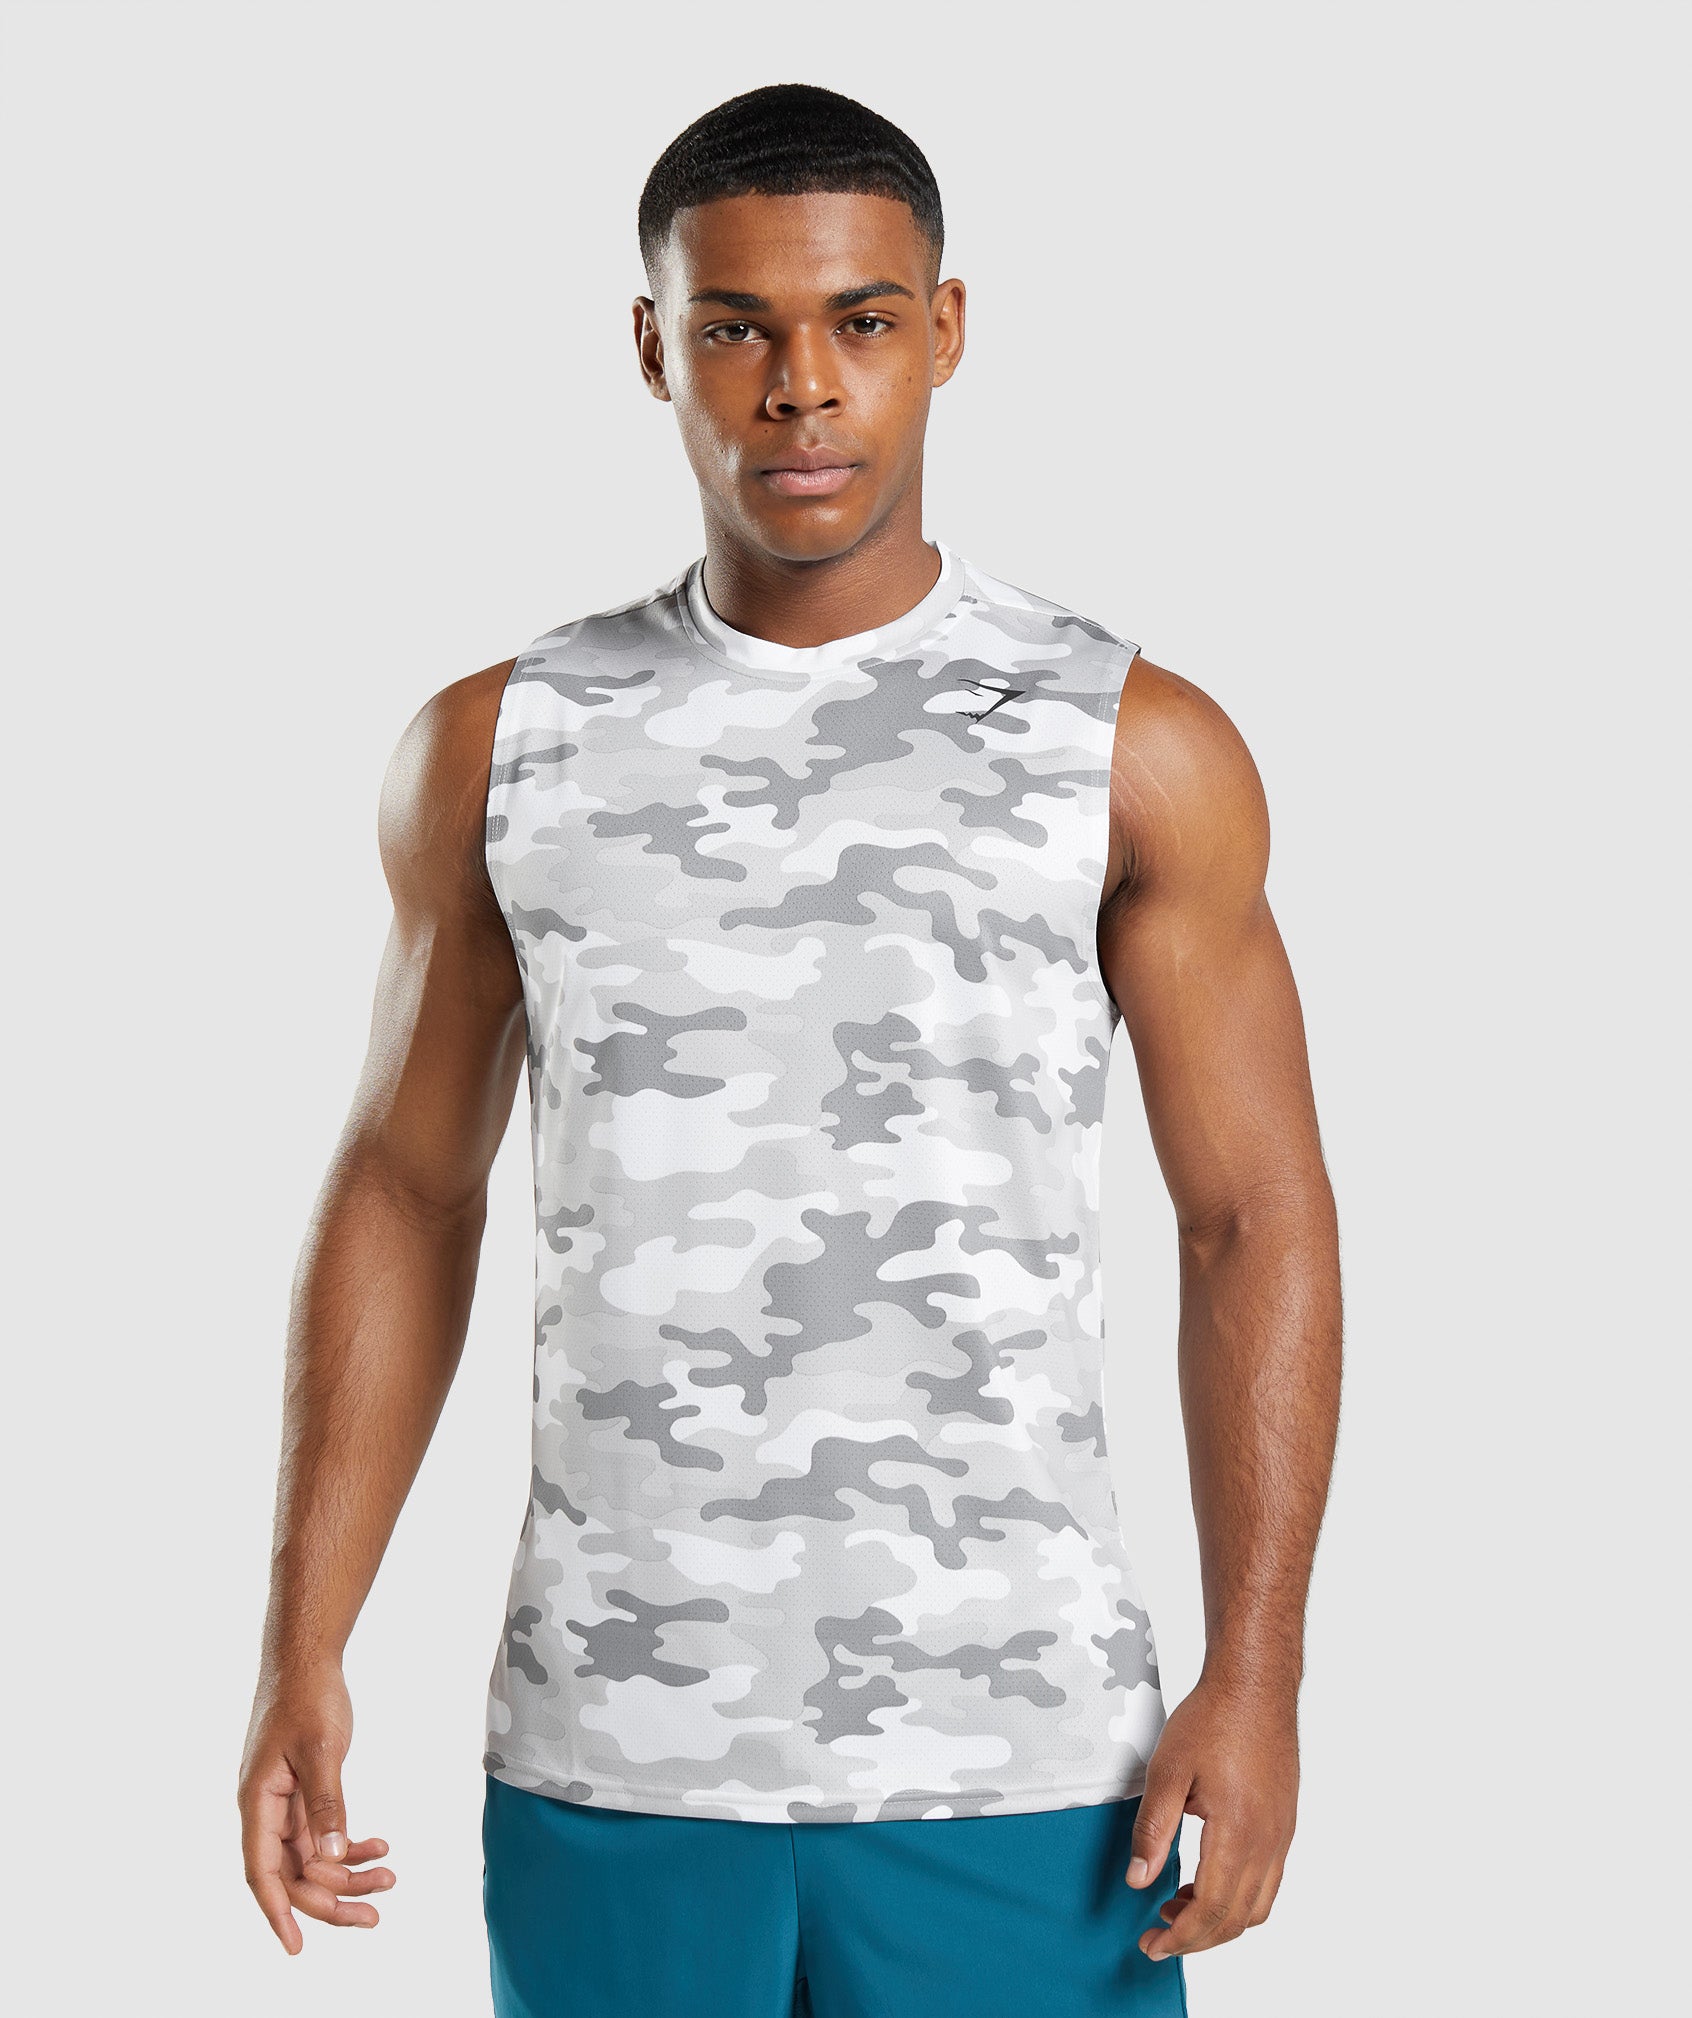 Arrival Sleeveless T-Shirt in Light Grey Print - view 1